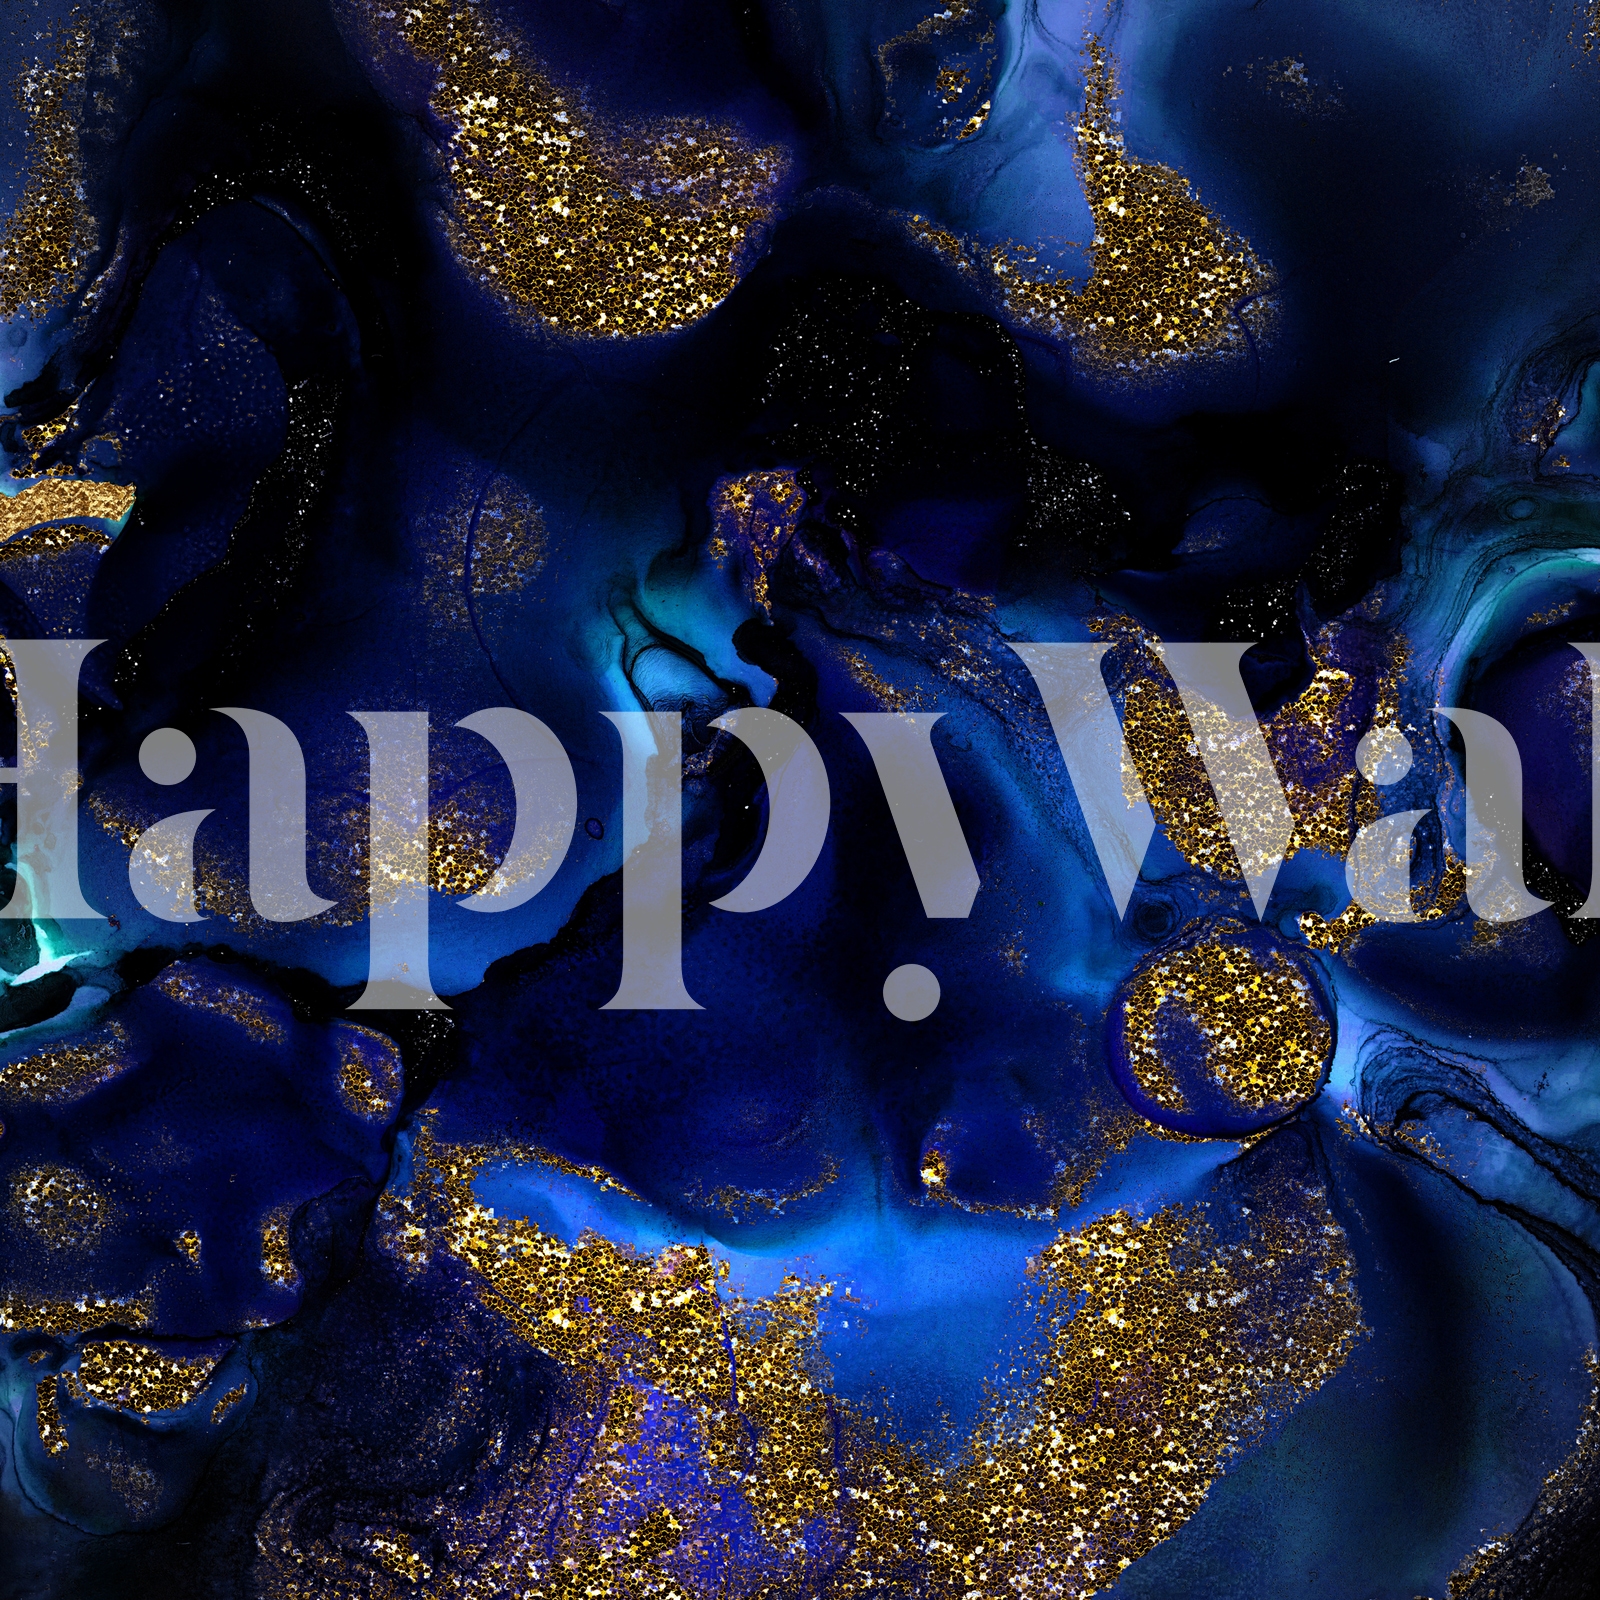 Indigo Blue Marble and Gold Glitter wallpaper - Happywall